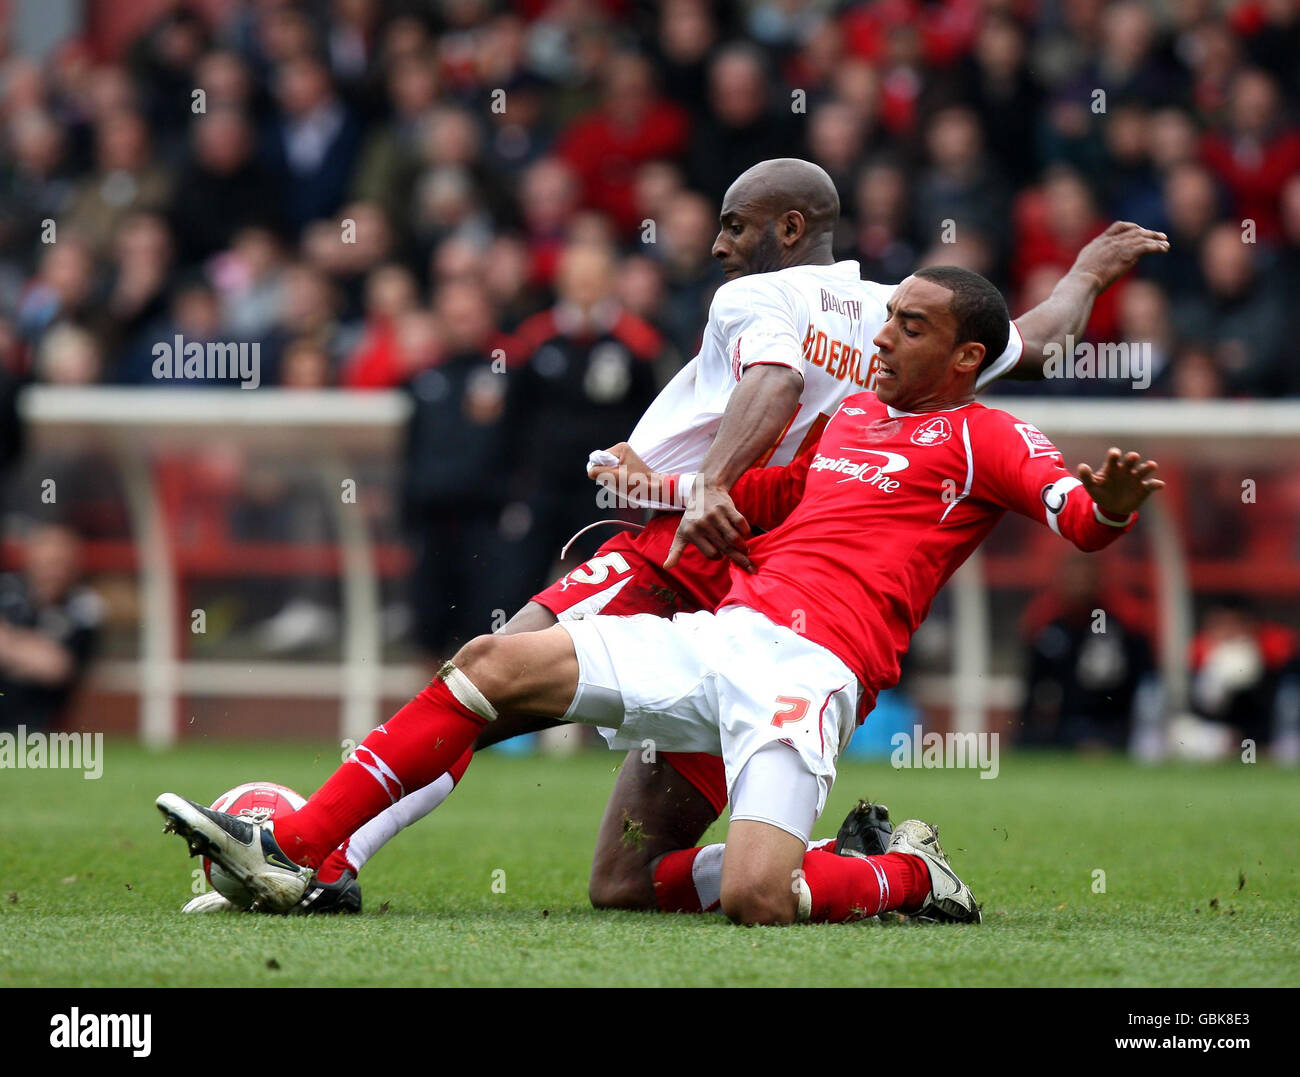 Nottingham Forest's James Perch (front) and Bristol City's Dele Adebola (back) during the Coca-Cola Football League Championship match at the City Ground, Nottingham. Stock Photo